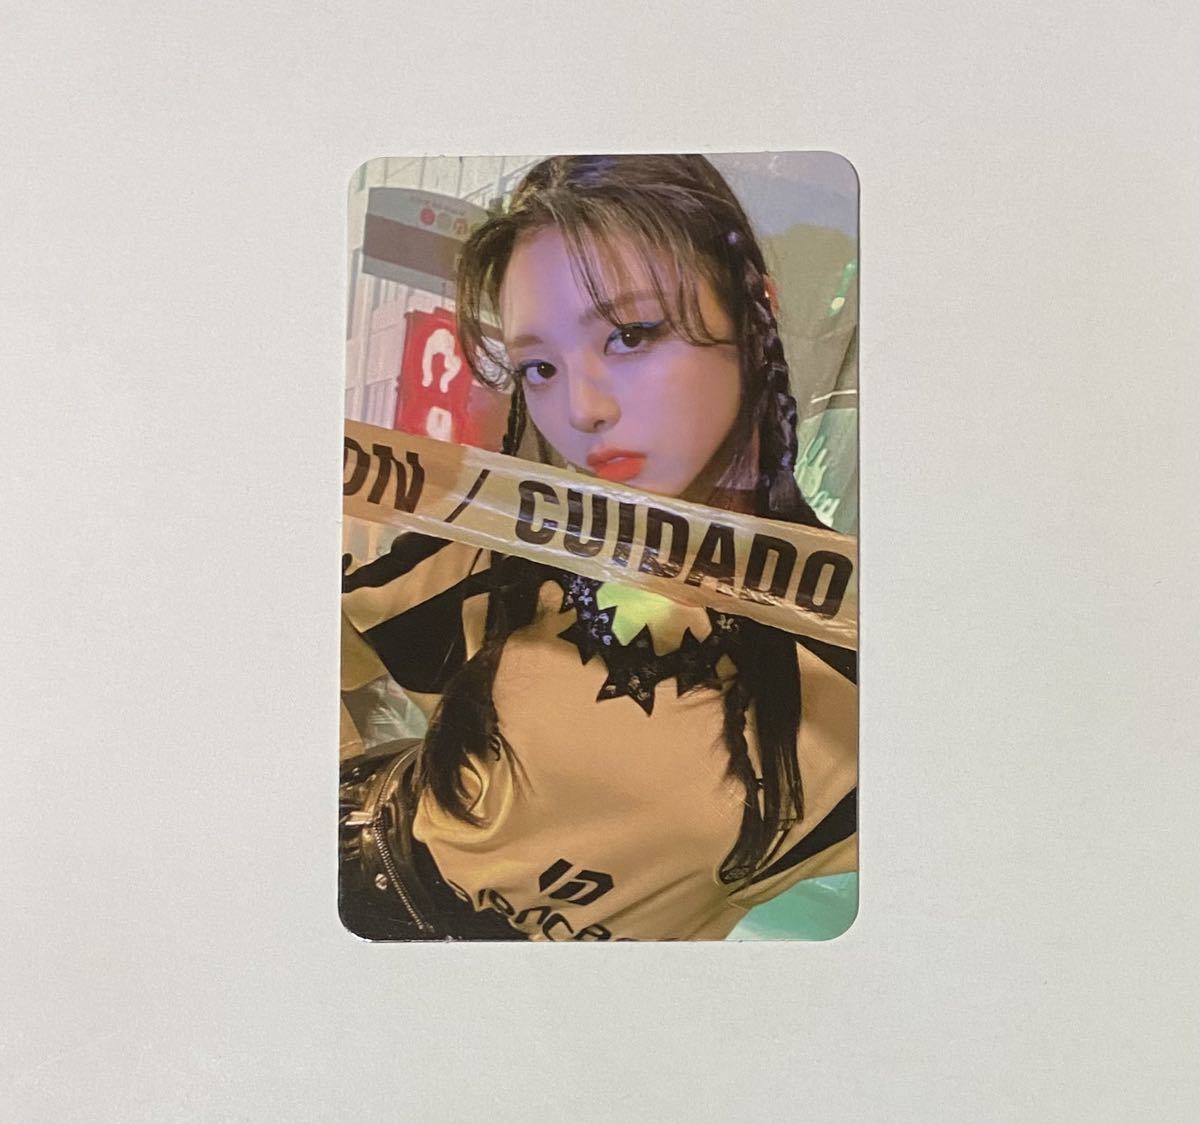 ITZY ユナ YUNA GUESS WHO トレカ Photocard